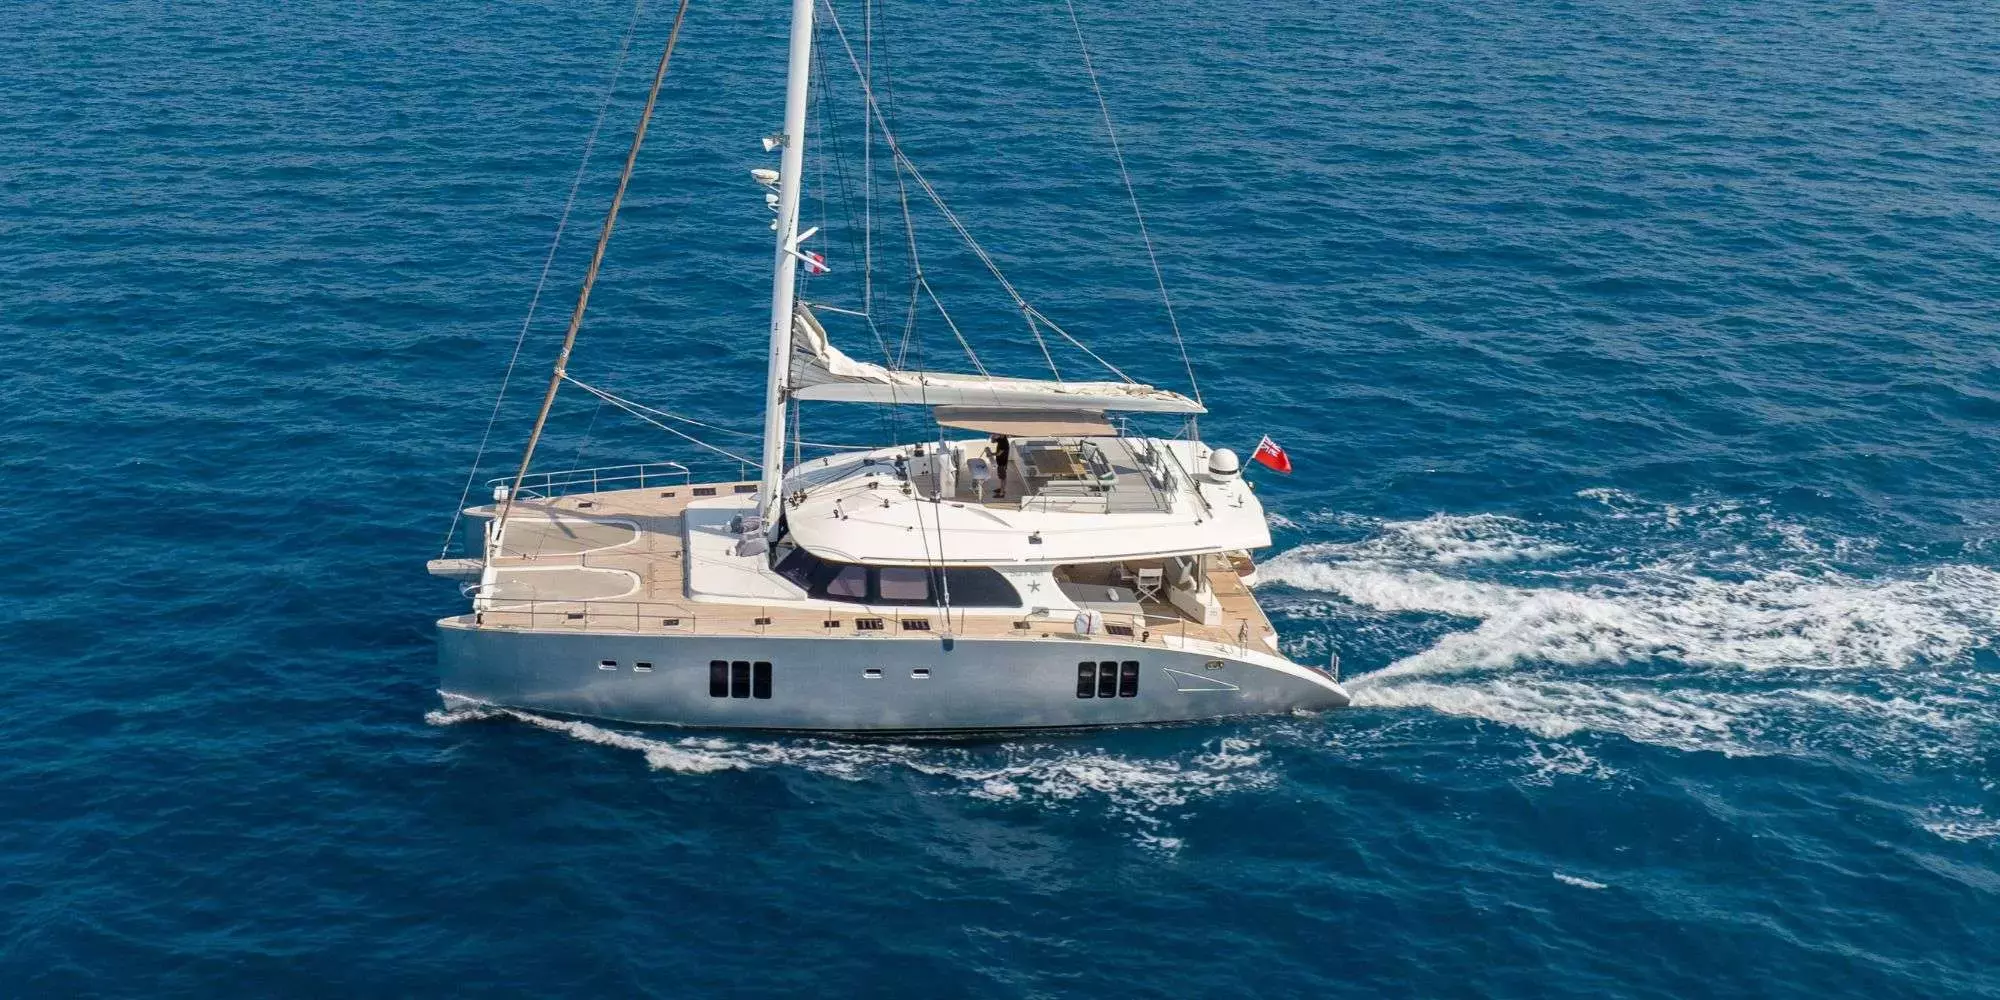 Seazen II by Sunreef Yachts - Special Offer for a private Luxury Catamaran Rental in Sardinia with a crew